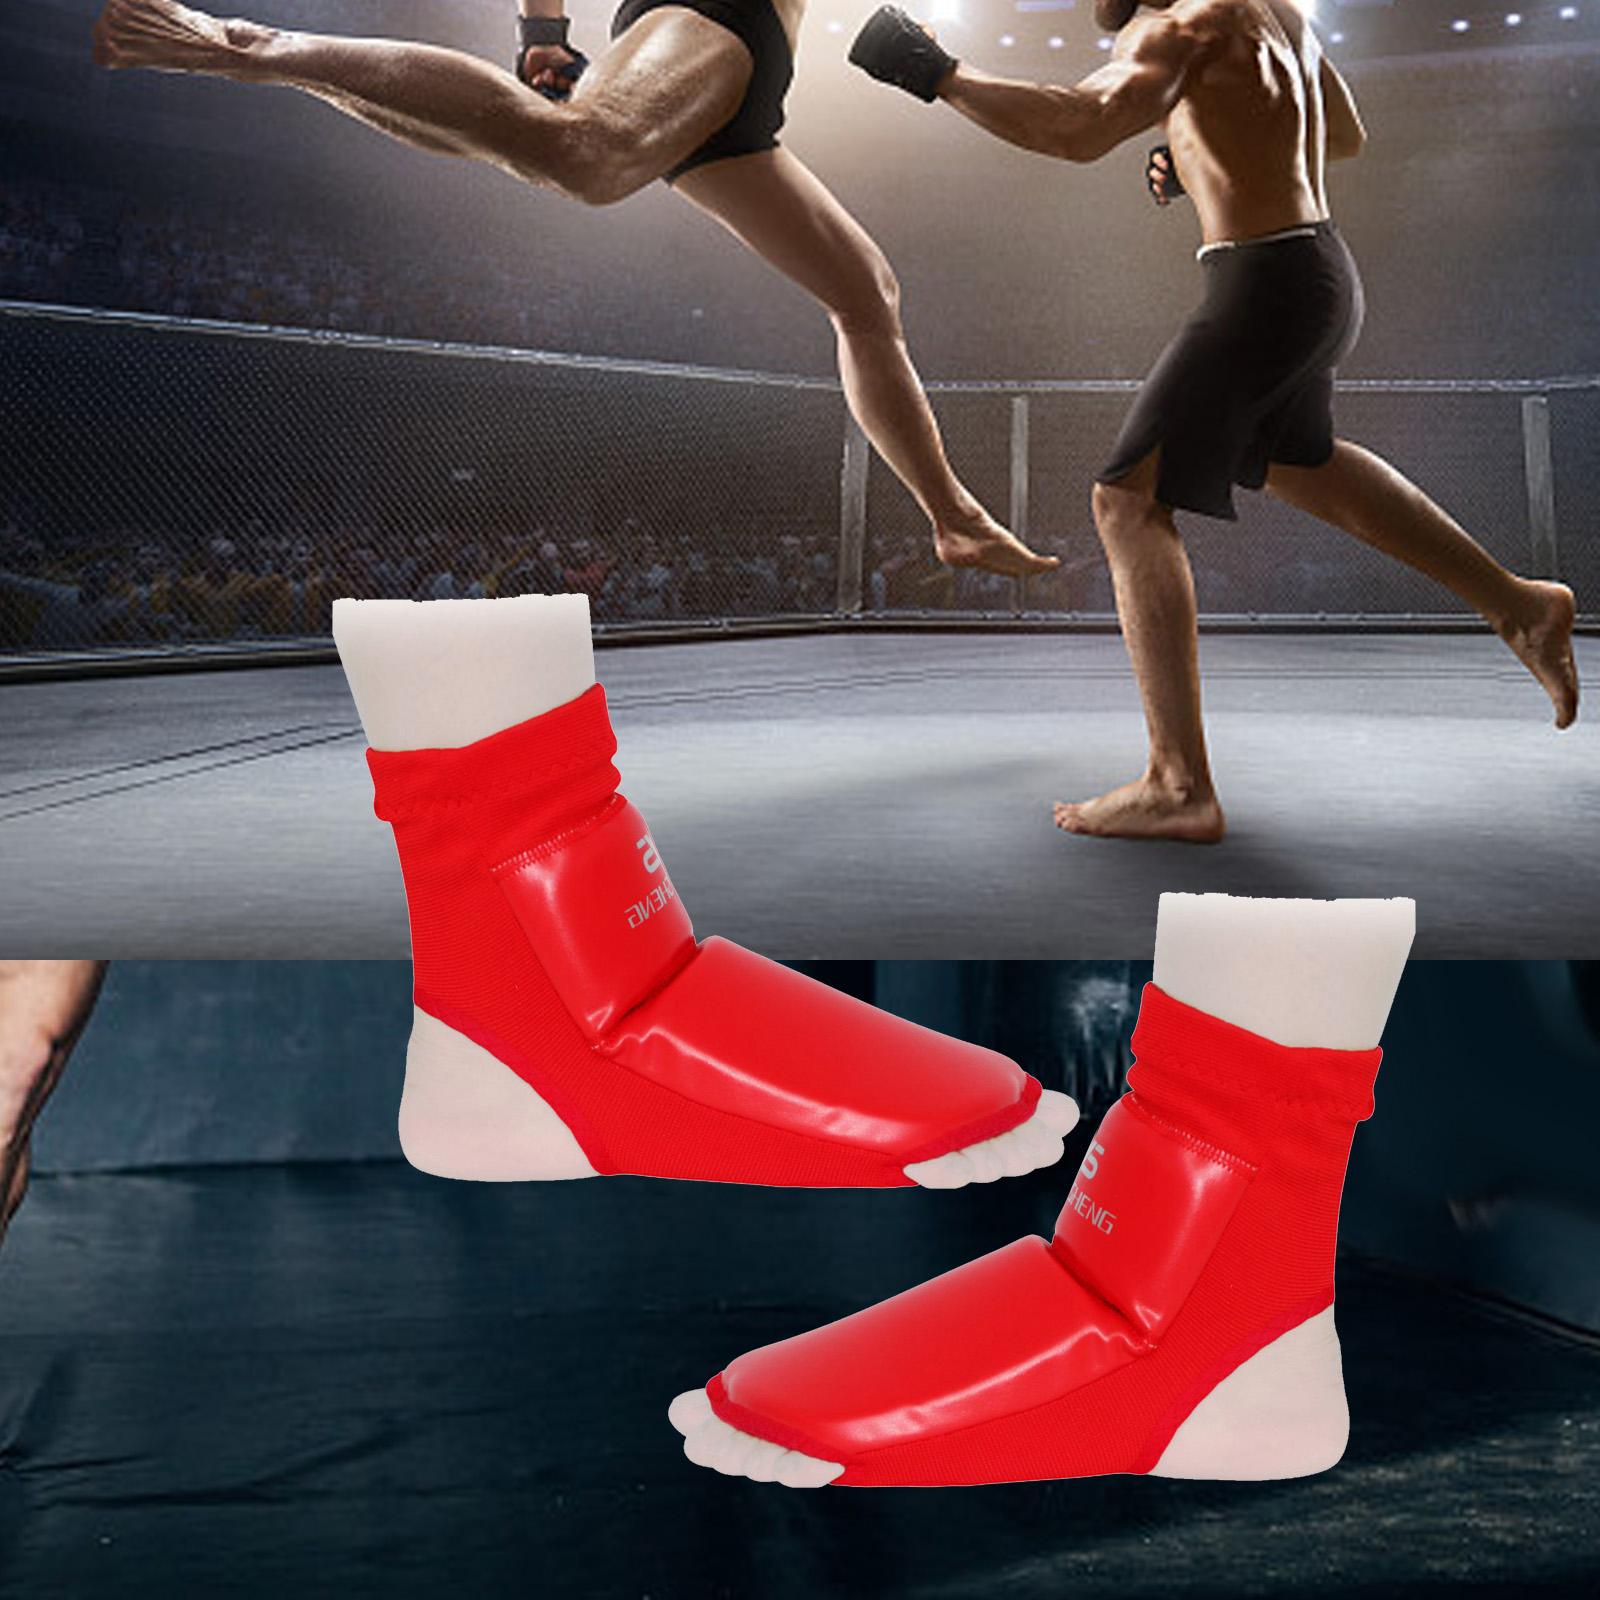 Instep Guard Protective Gear Foot Protector for Kids Adults Boxing Taekwondo M